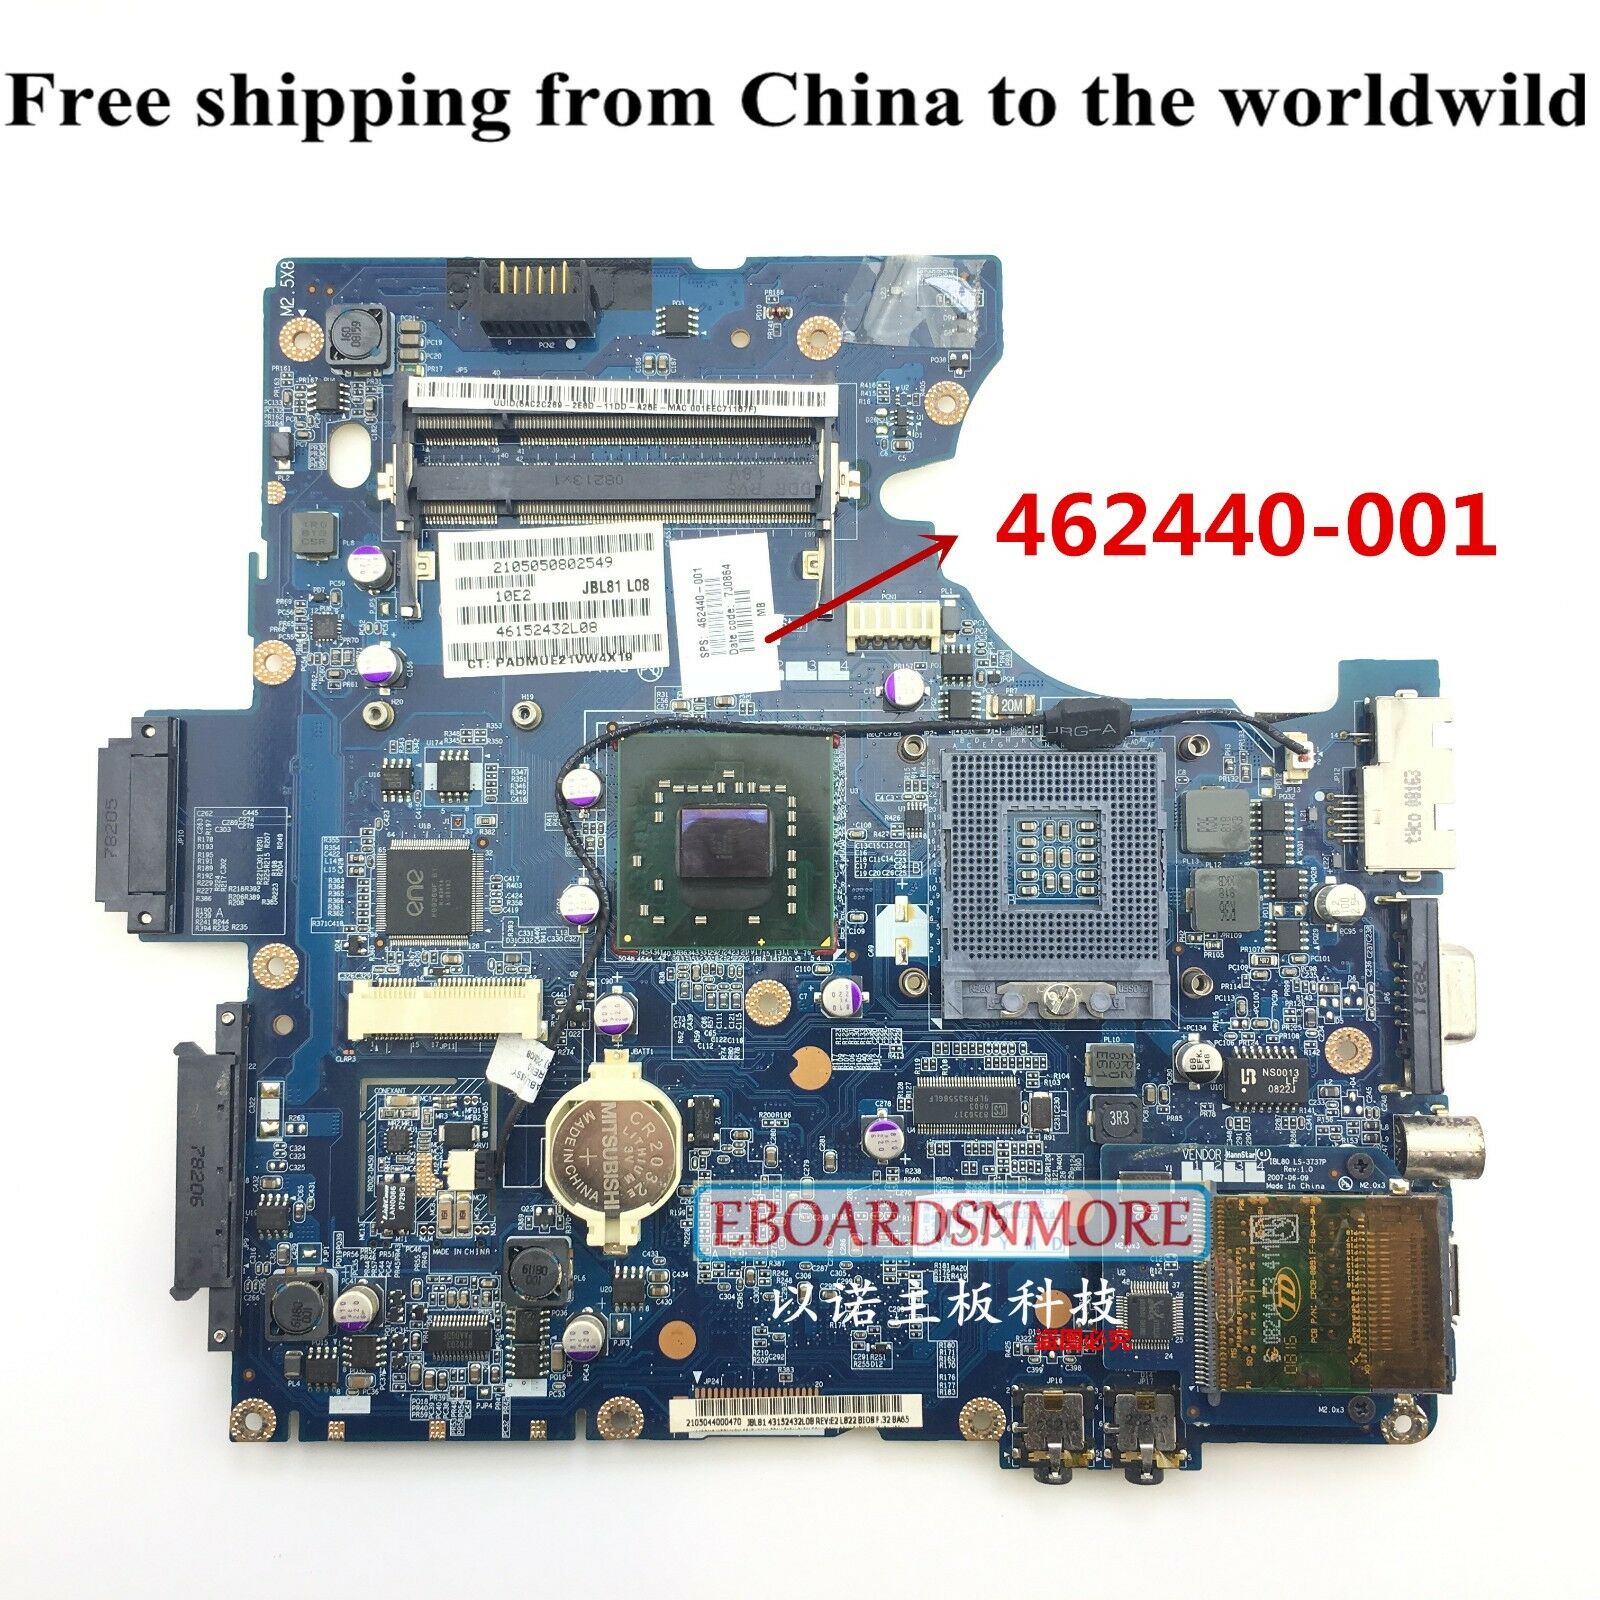 462440-001 Motherboard, JBL81 LA-4031P, for HP compal C700 G7000Laptop, A Compatible CPU Brand: Intel Memory